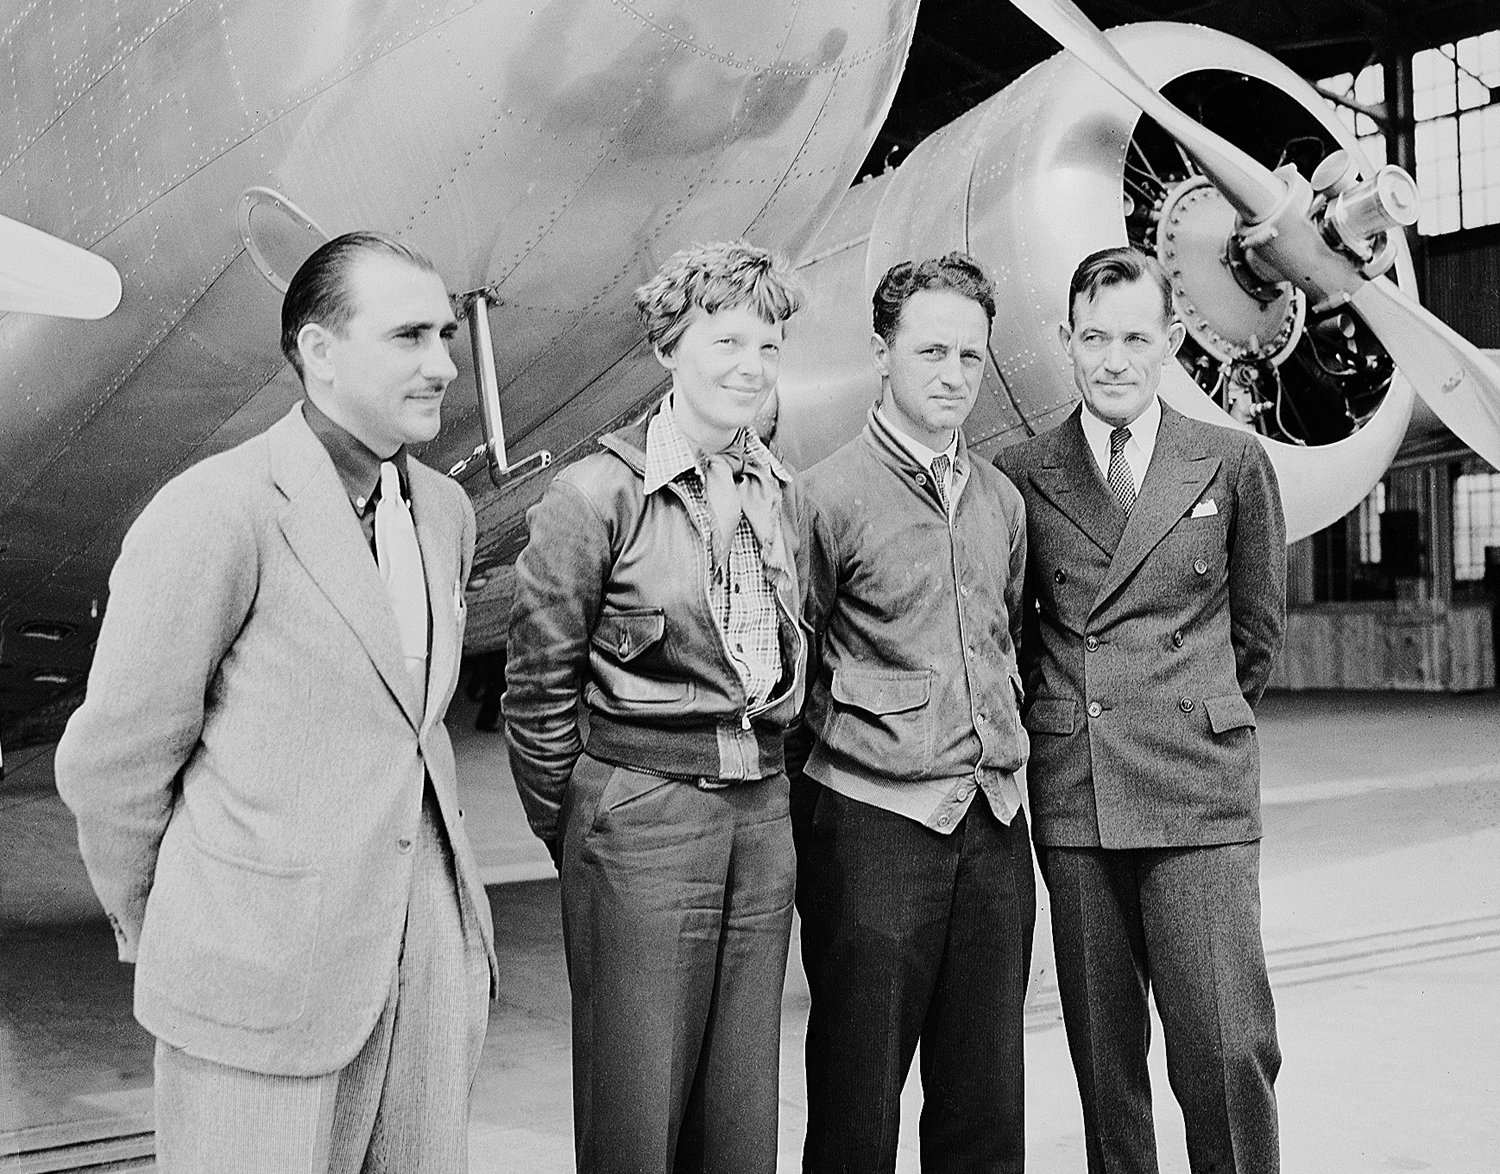  Aviator Amelia Earhart stands with members of her flight team in Honolulu, Hawaii in 1937. From left are Paul Mantz, technical adviser, Earhart, navigators Harry Manning and Fred Noonan.  (AP Photo) 